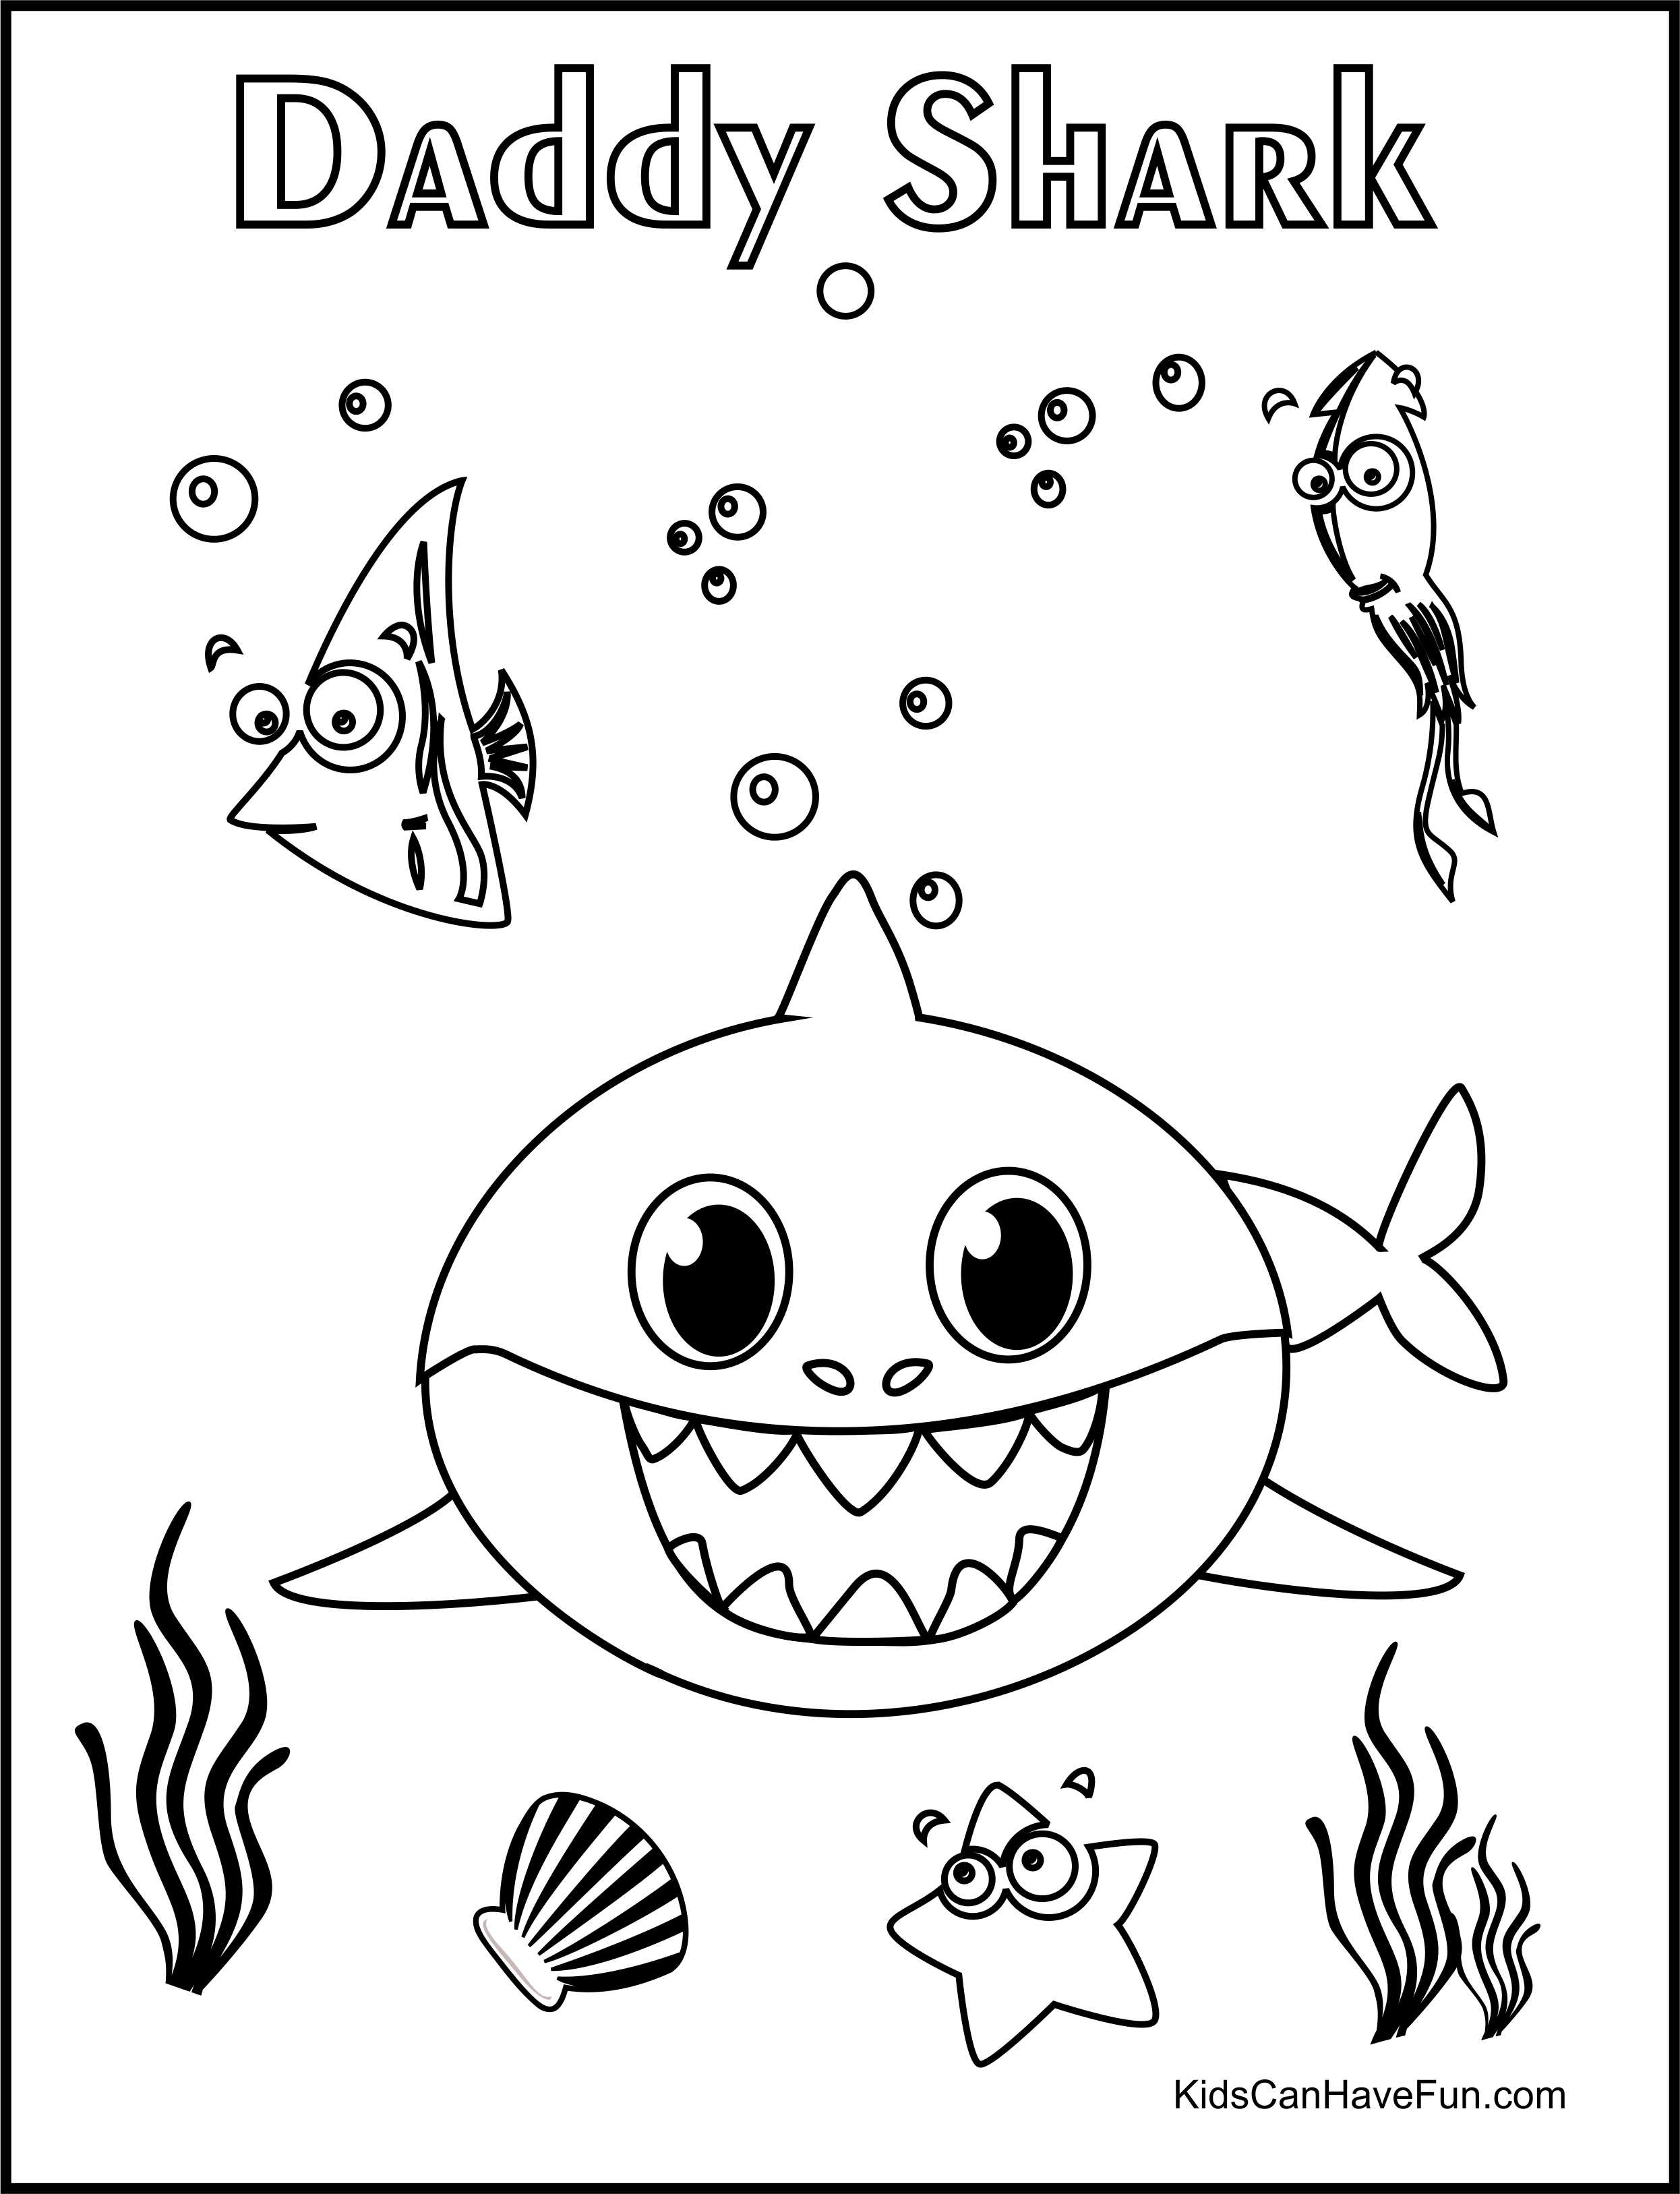 Daddy shark rting coloring page in shark coloring pag coloring pag coloring pag for kids